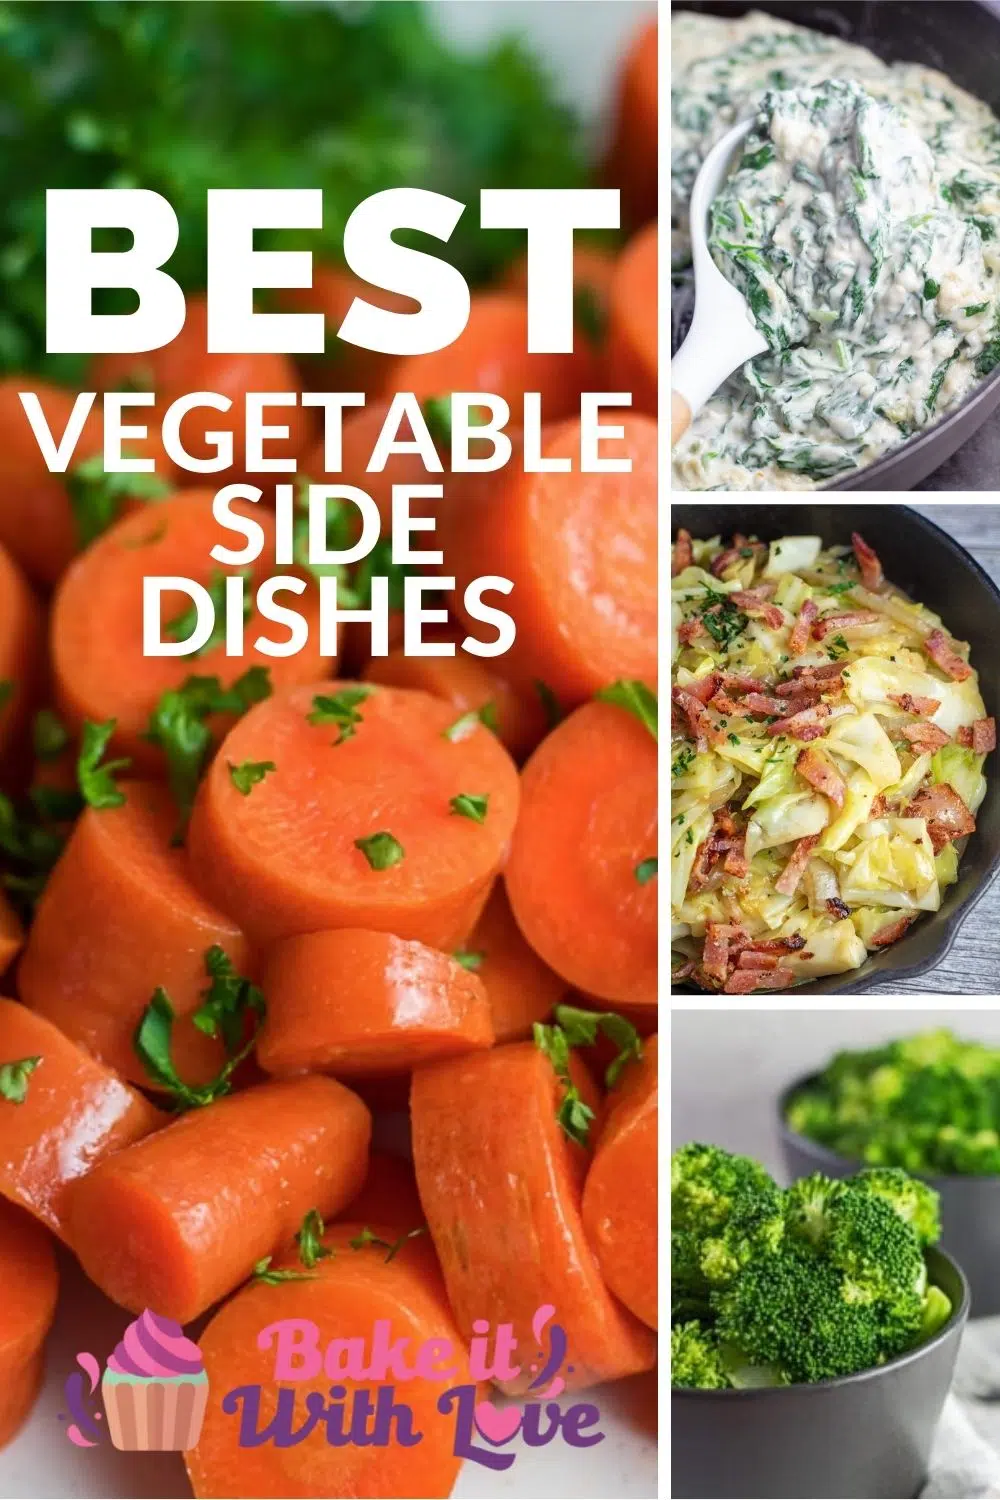 Best vegetable side dishes pin with 4 recipes featured and text title overlay.